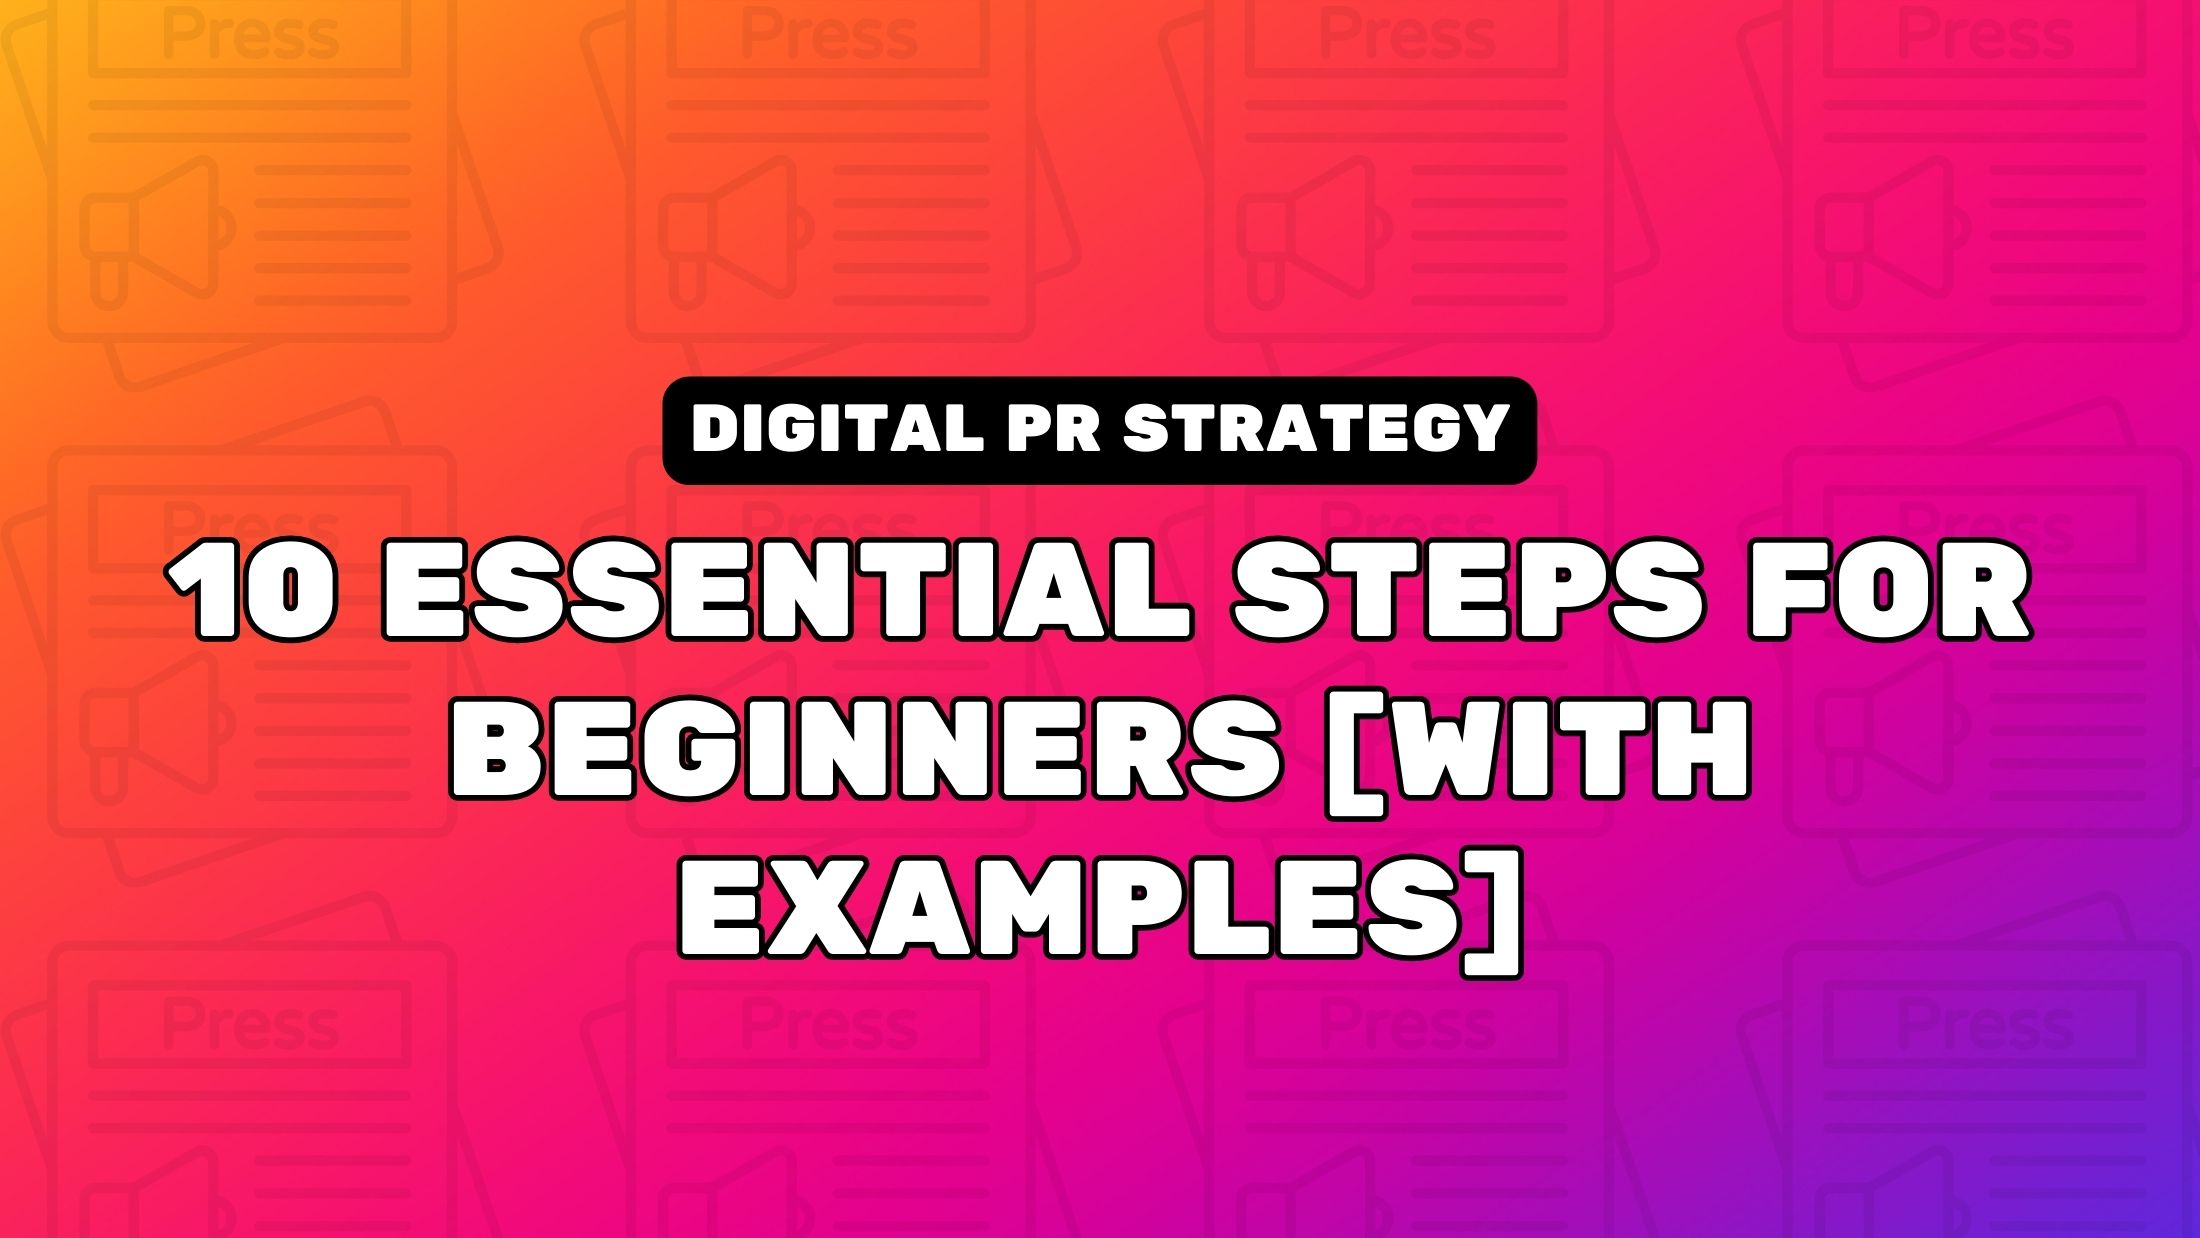 Building A Digital PR Strategy - 10 Essential Steps for Beginners [With Examples] bblog masthead